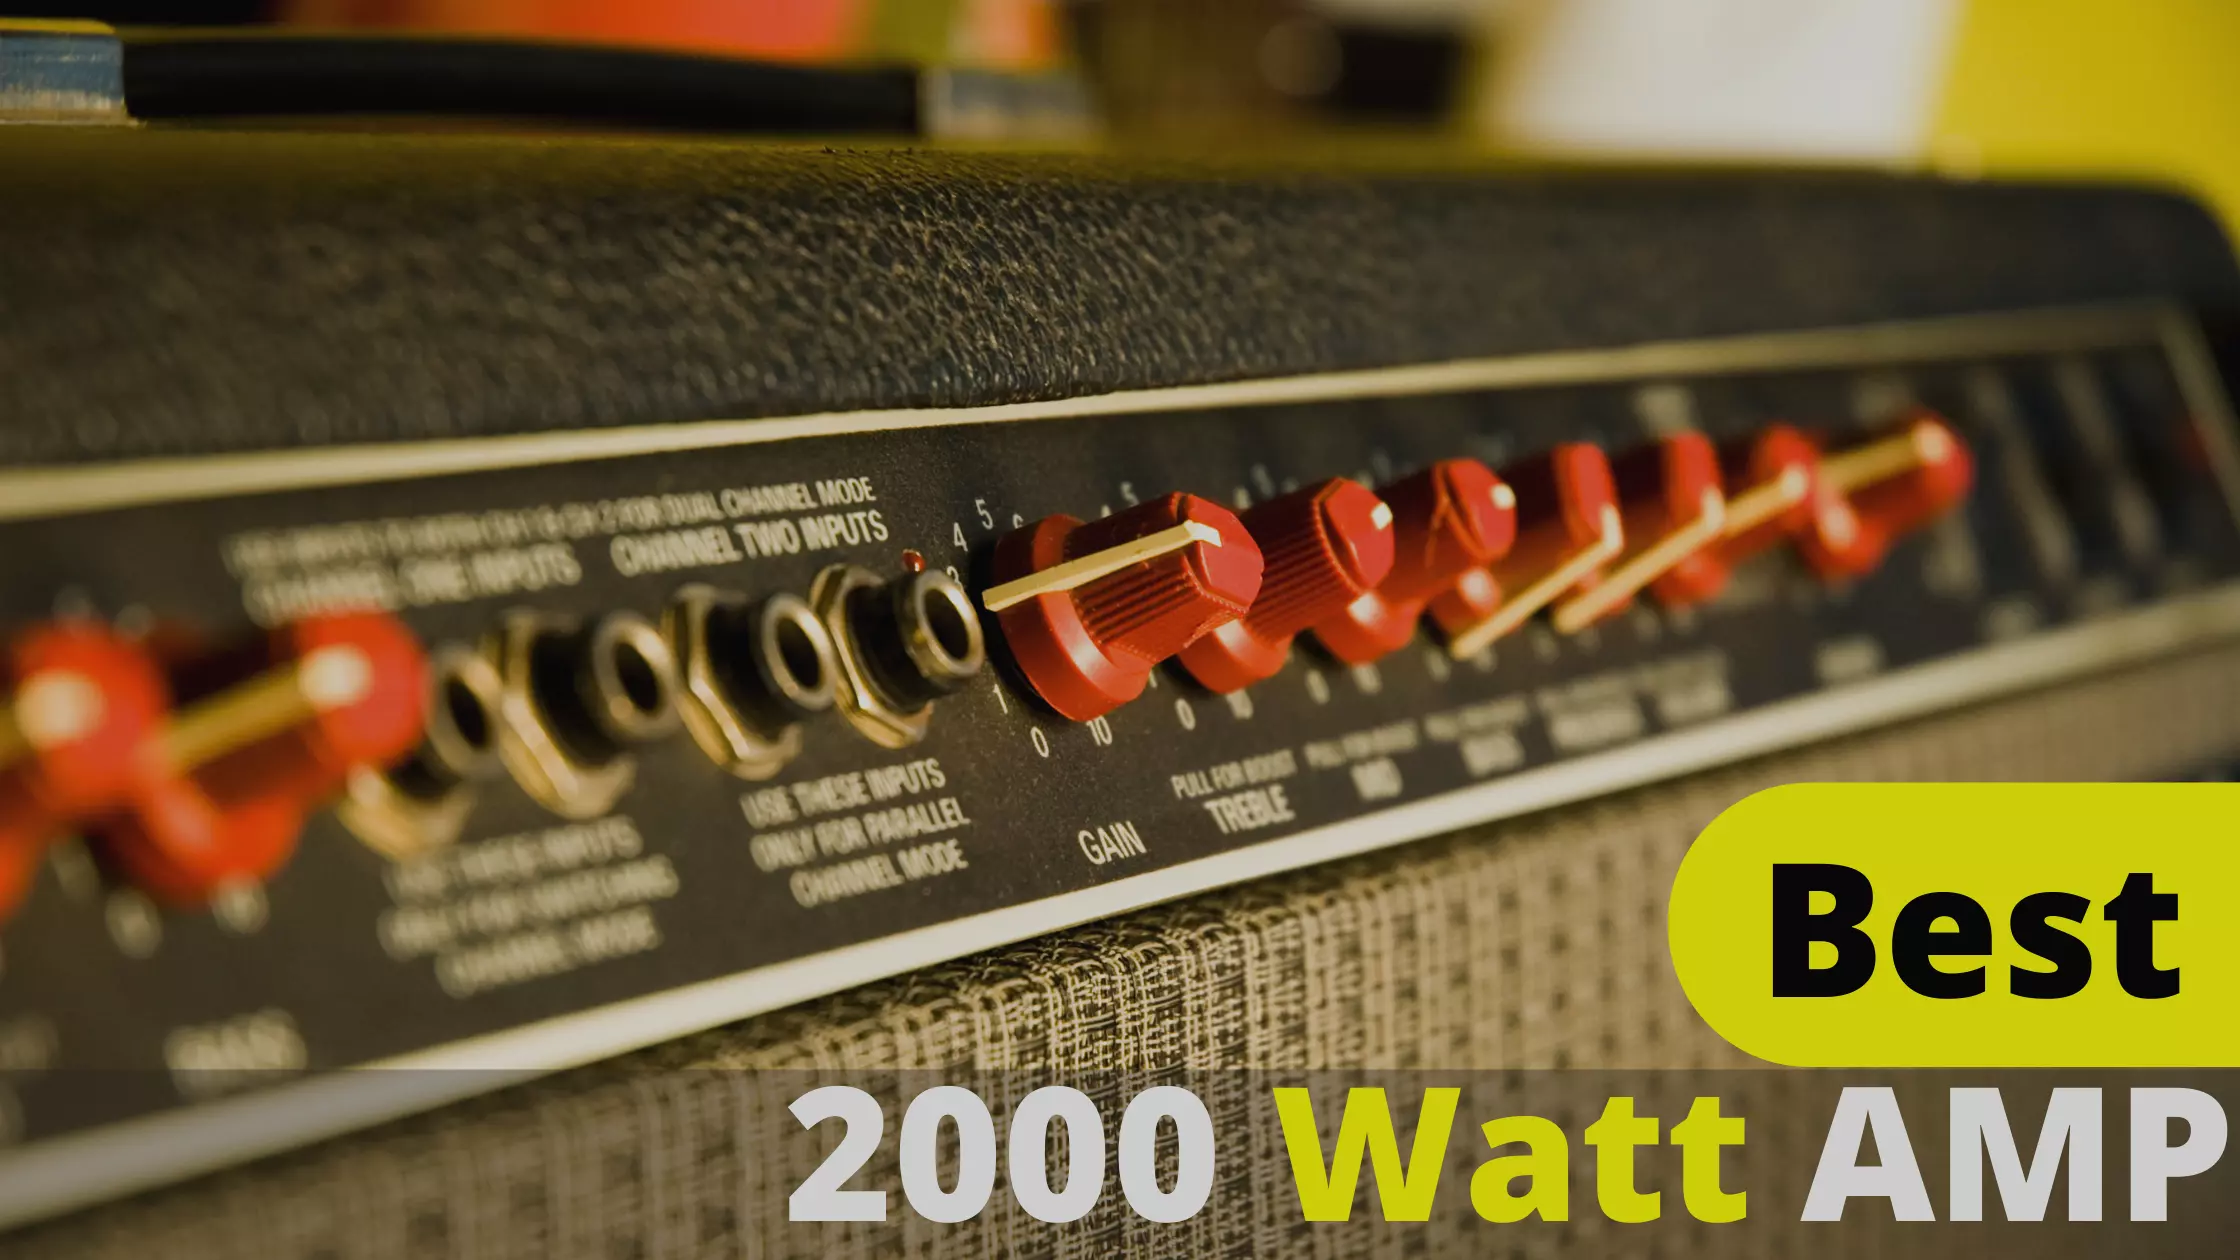 Top 12 Best 2000 Watt Amp Reviews and Buying Guide 2022